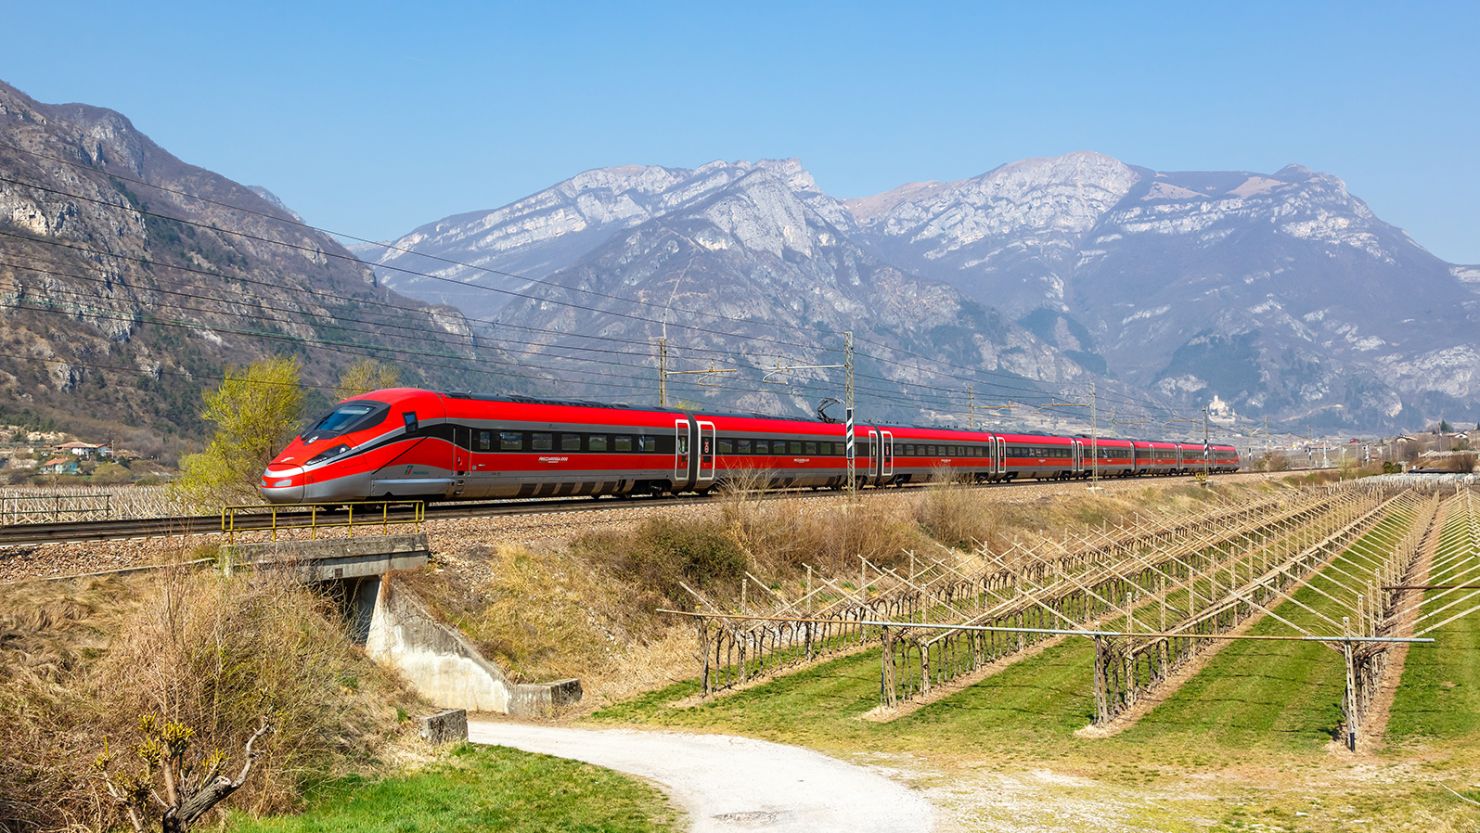 Italy's famous Frecciarossa trains could soon be linking up with ITA Airways flights.